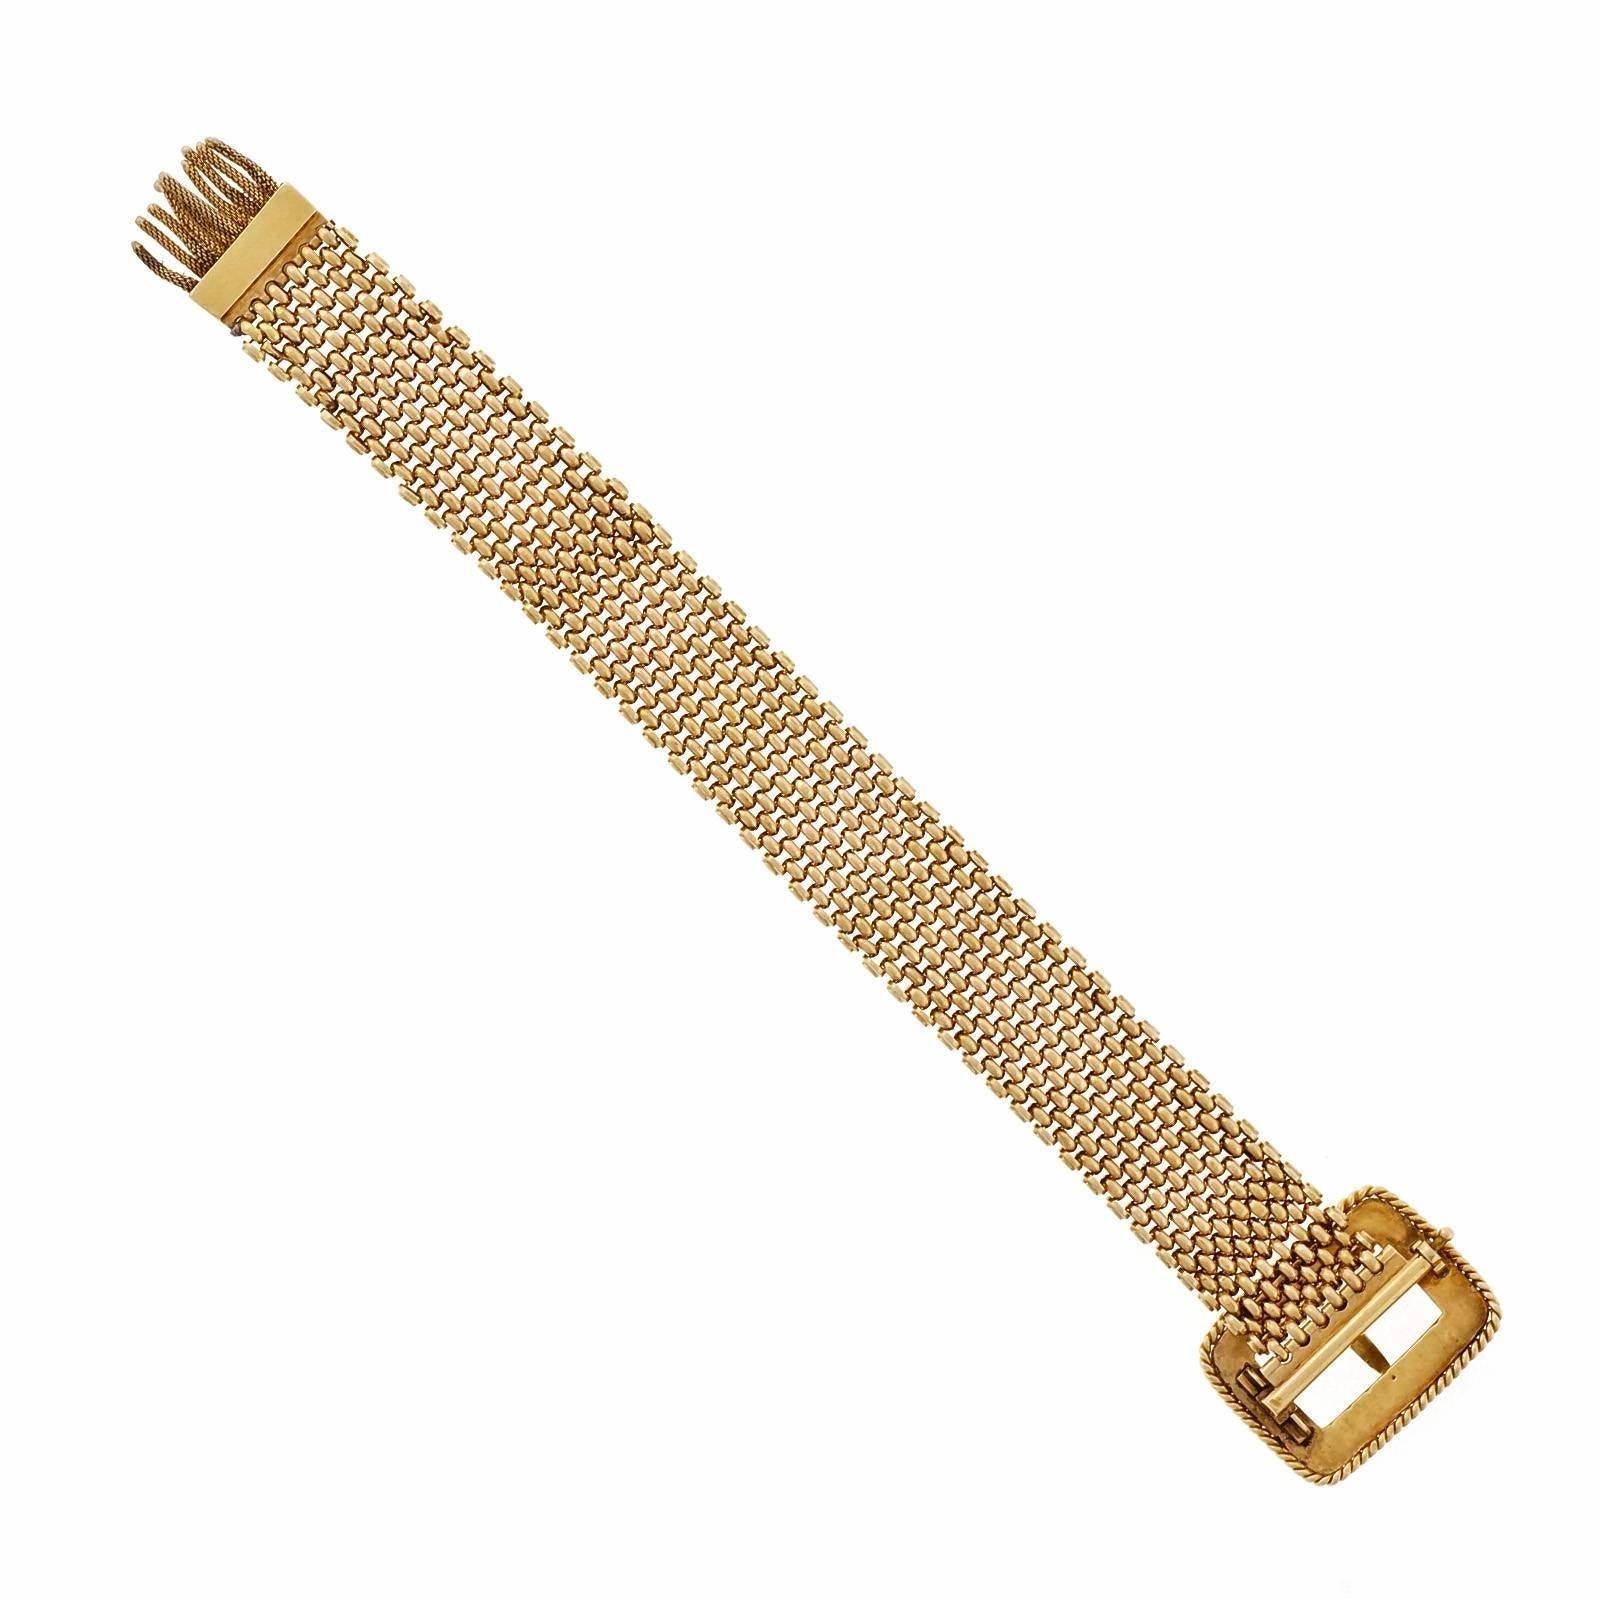 Vintage early 1900’s mesh buckle style bracelet with adjustable hinged buckle that adjusts to any length. Natural patina.

14k yellow gold
Tested: 14k
35.0 grams
Length: 7.75 inches – Width: 18.21mm – Depth: 3.41mm
